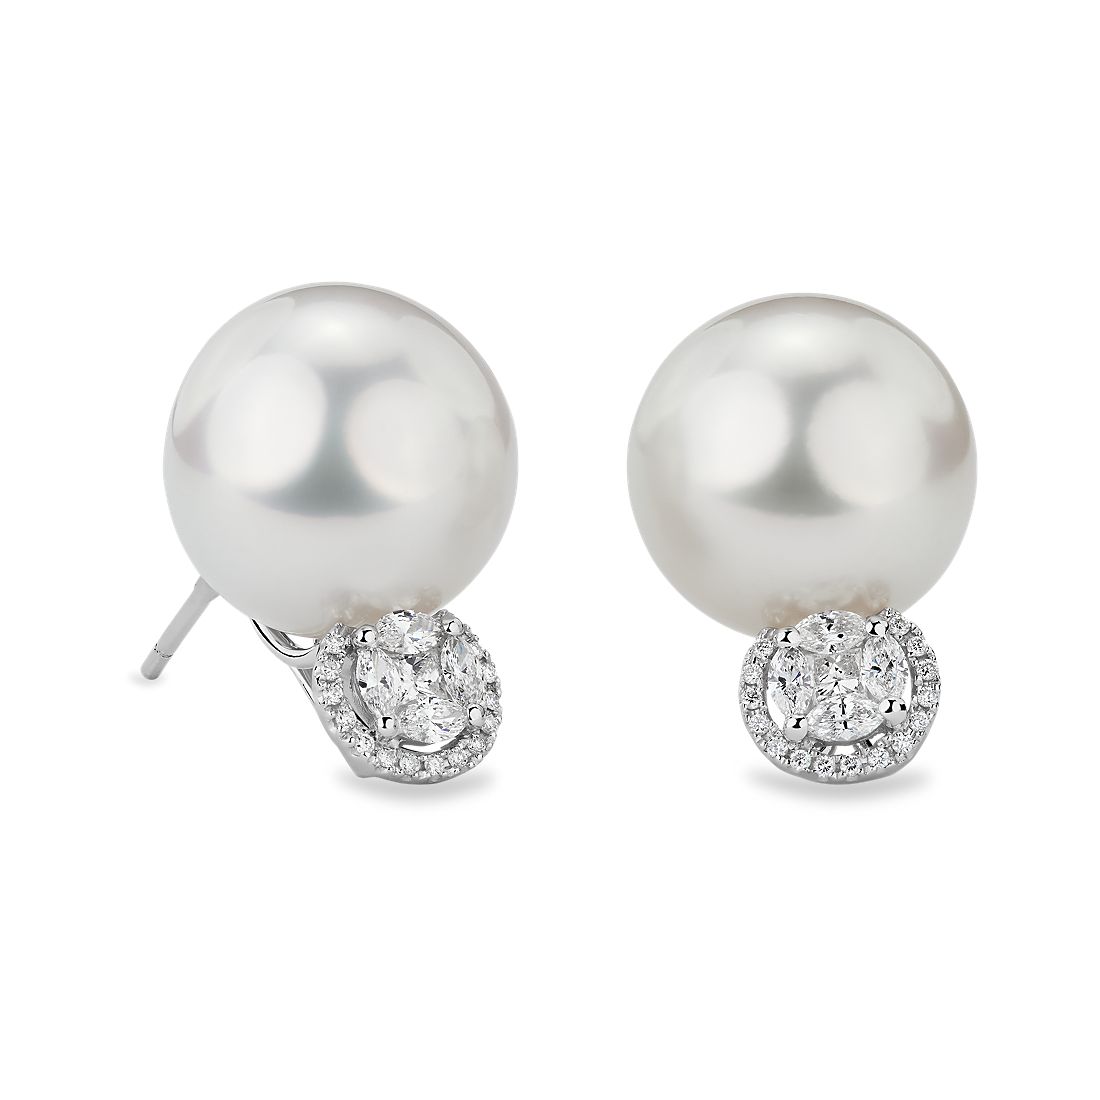 South Sea Pearl Drop Earrings with Attached Diamond Halo in 18k White Gold